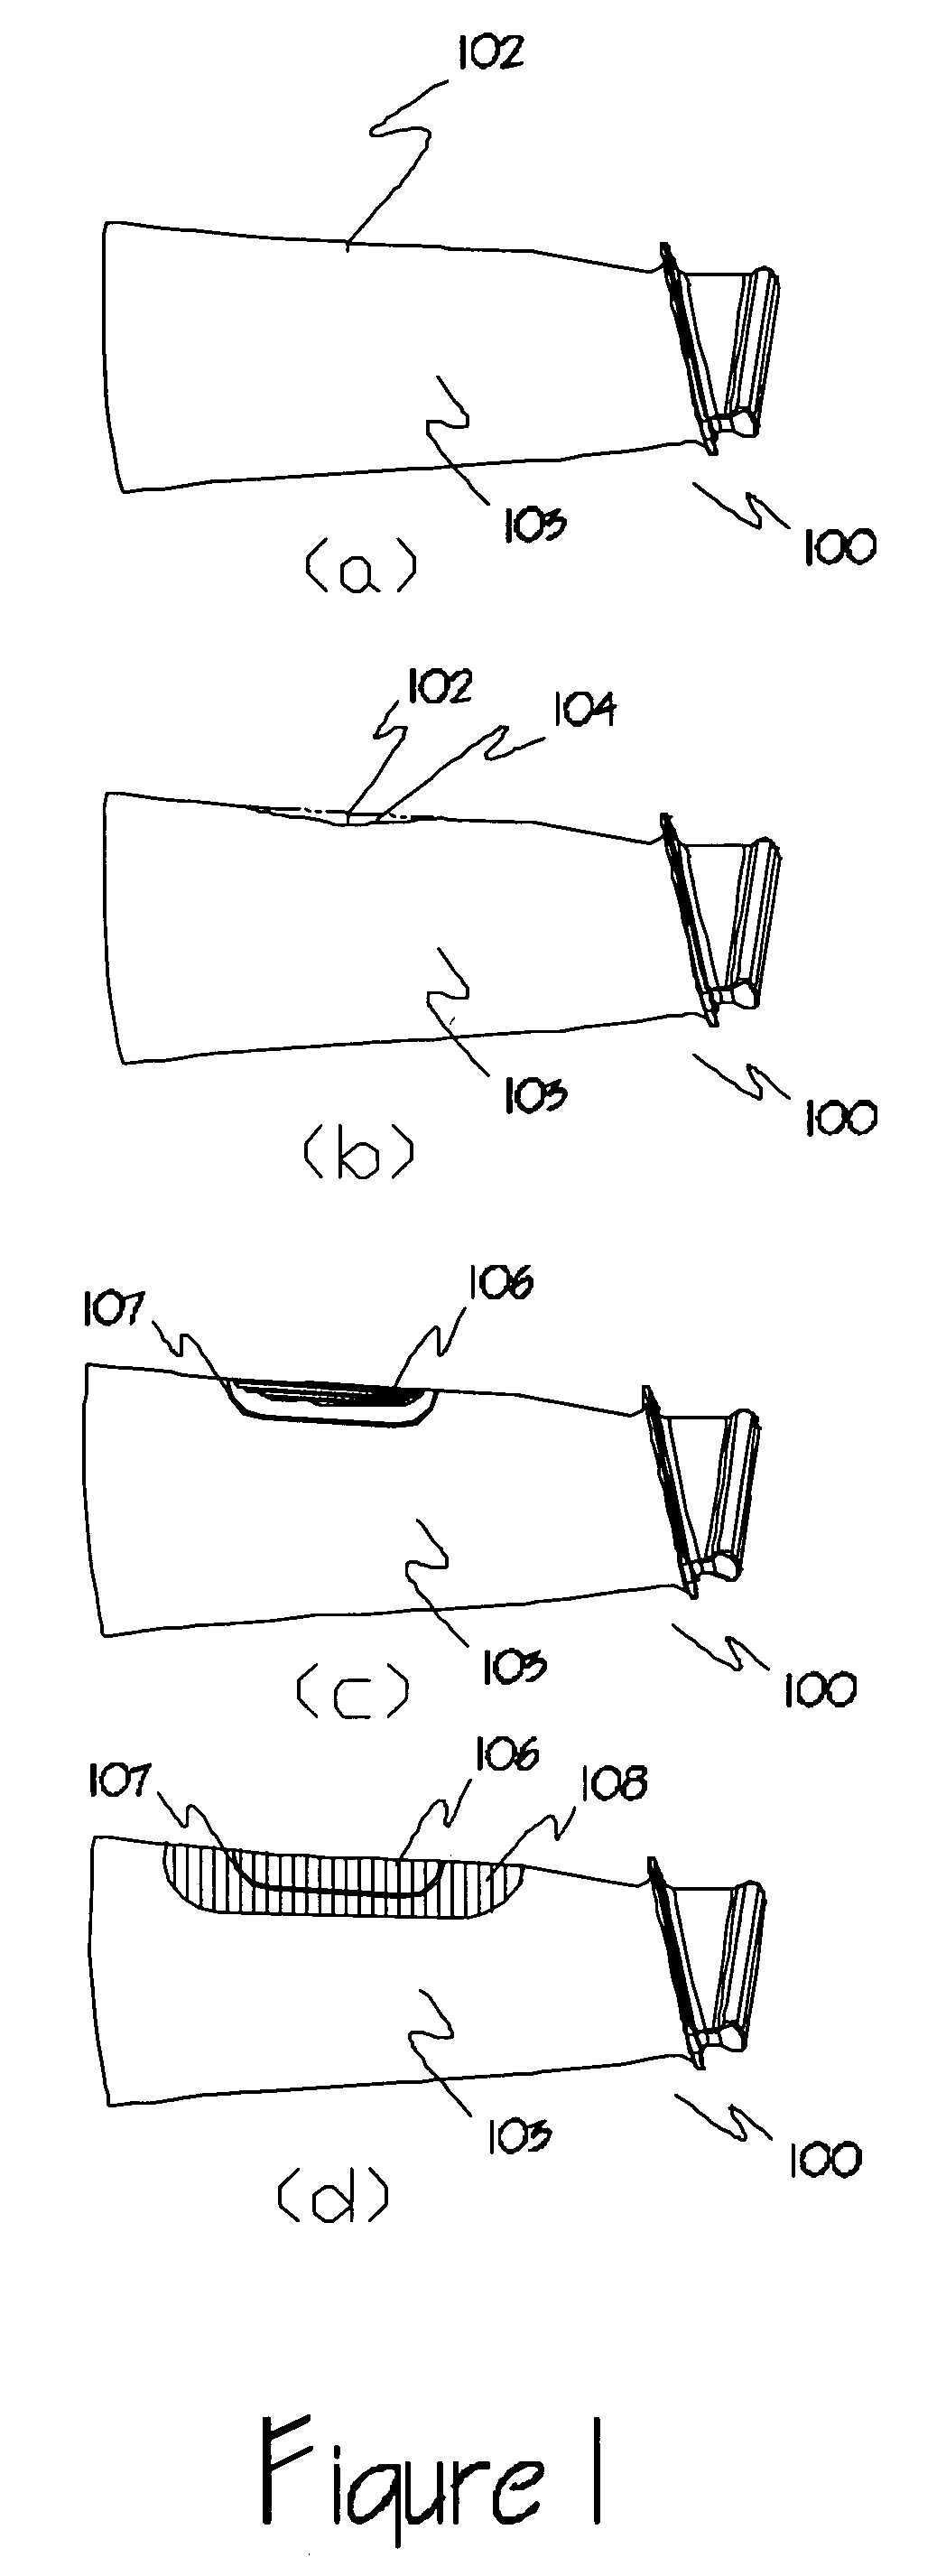 Method of improving the properties of a repaired component and a component improved thereby